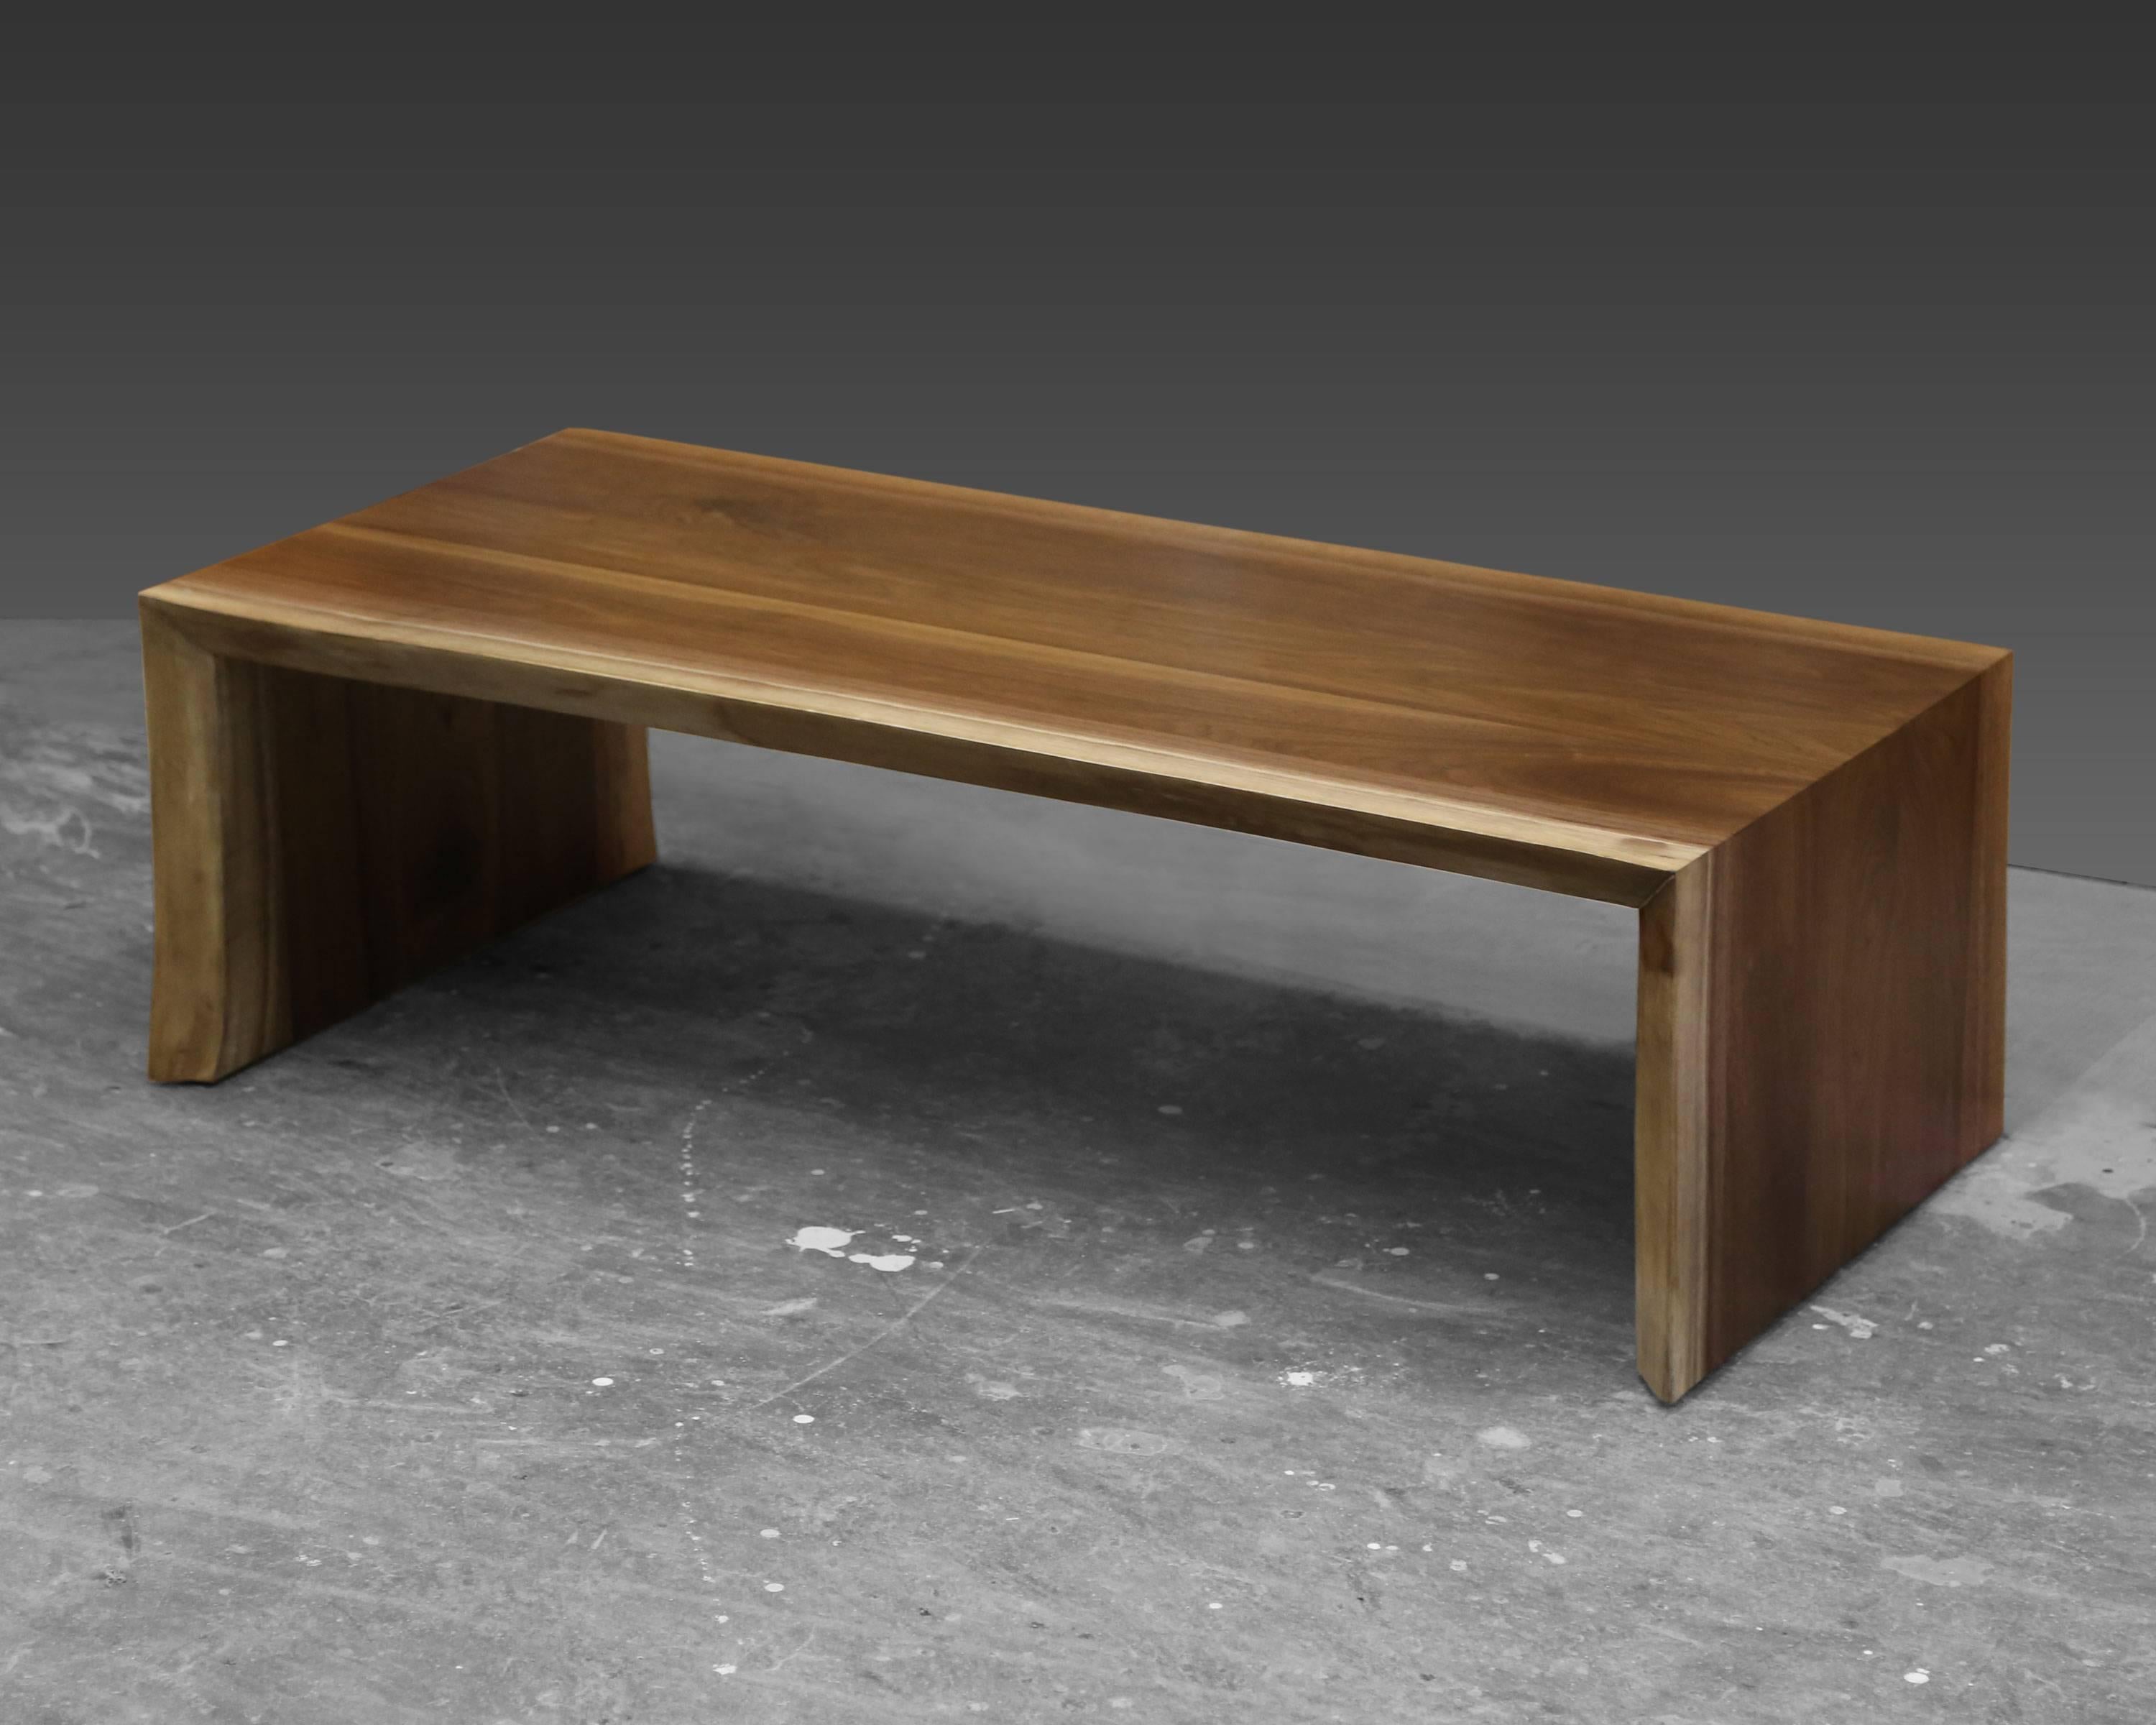 A coffee table made from a walnut live edge slab. The 